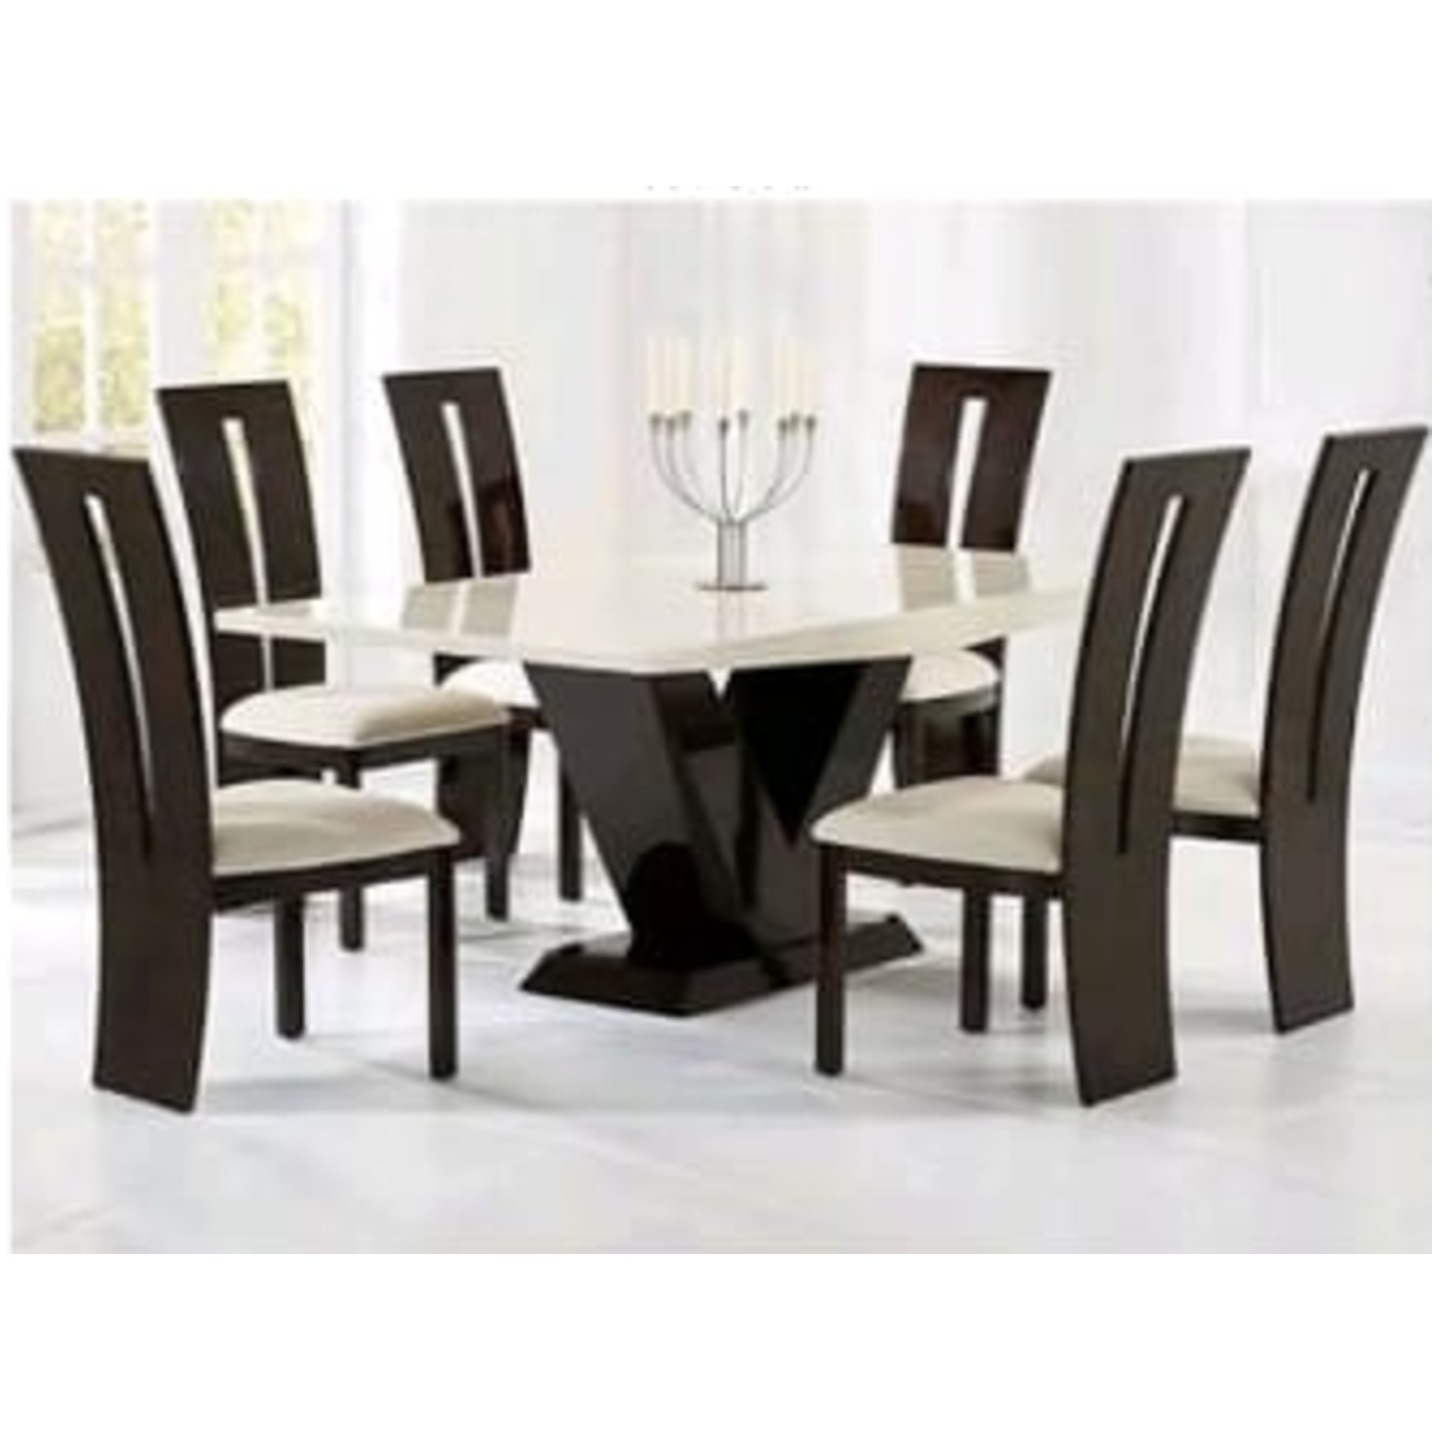 DW Marble Top H-003  Six Seater Dining Table Set in Brown Colour